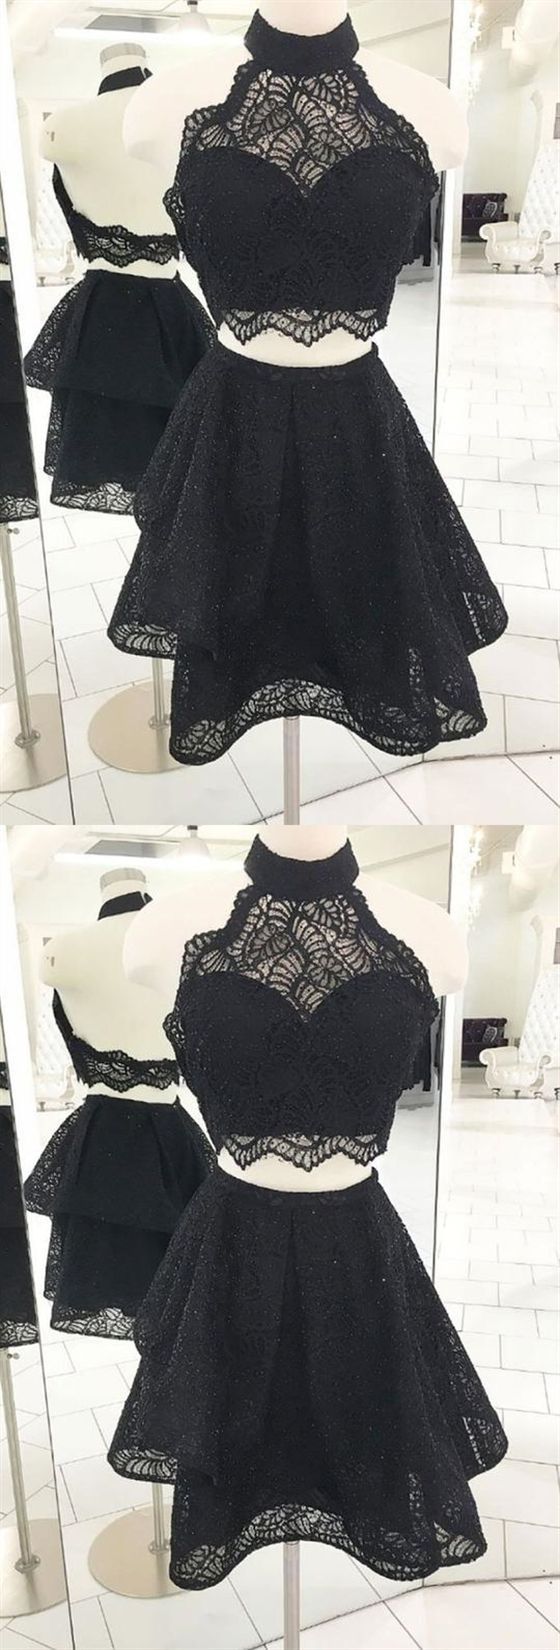 Black Halter Lace Homecoming Dresses, Two Pieces Short Cocktail Dresses CD417